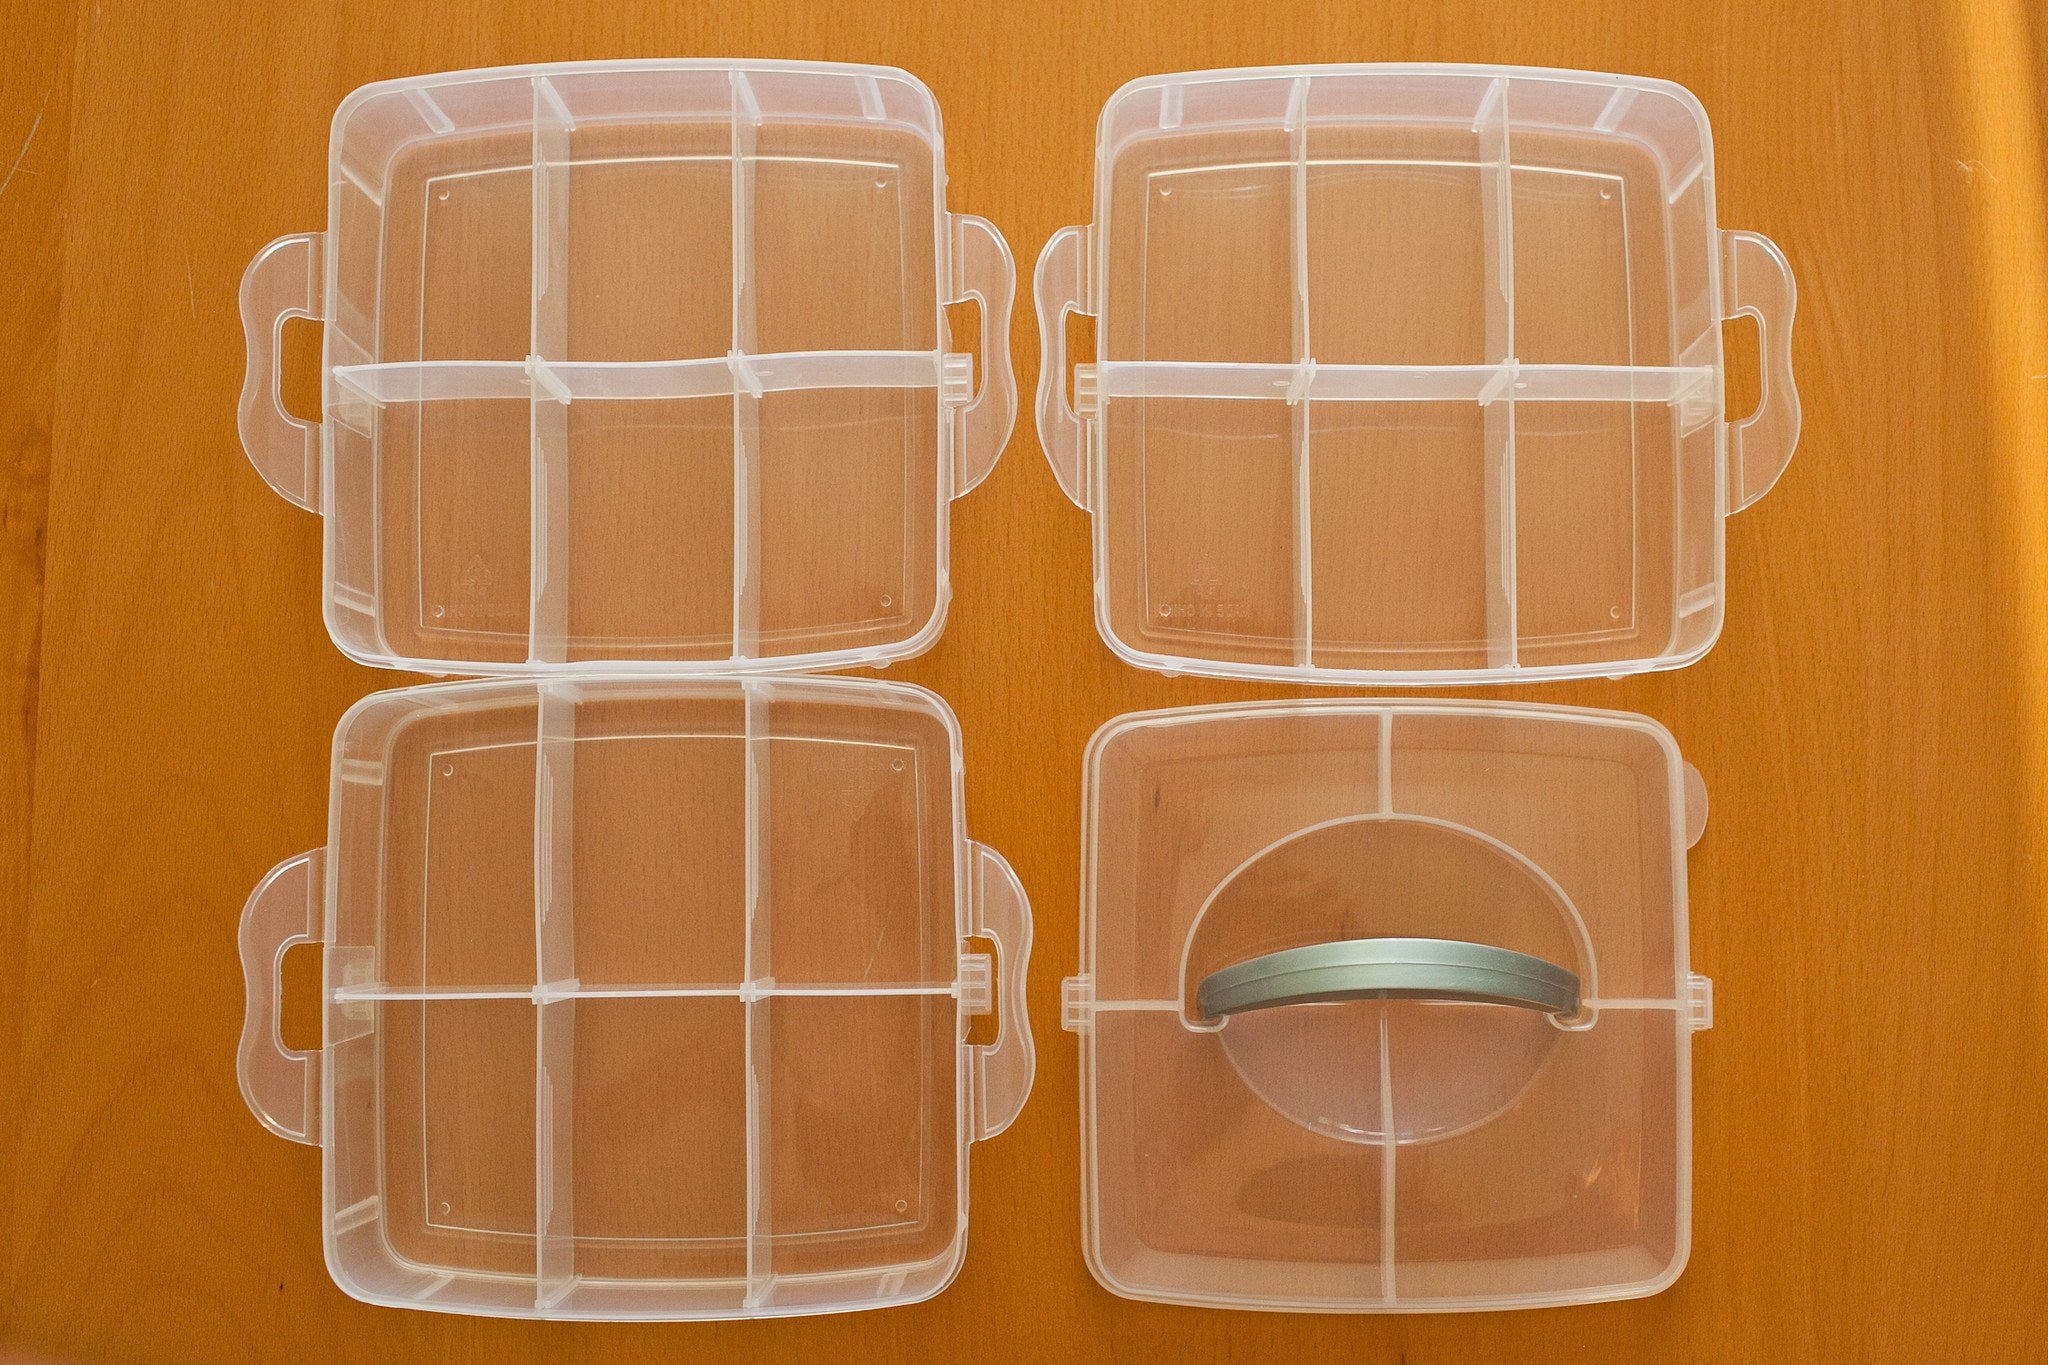 3 Tier Stackable Clear Plastic Case with Removable Dividers - Caddy Bay  Collection